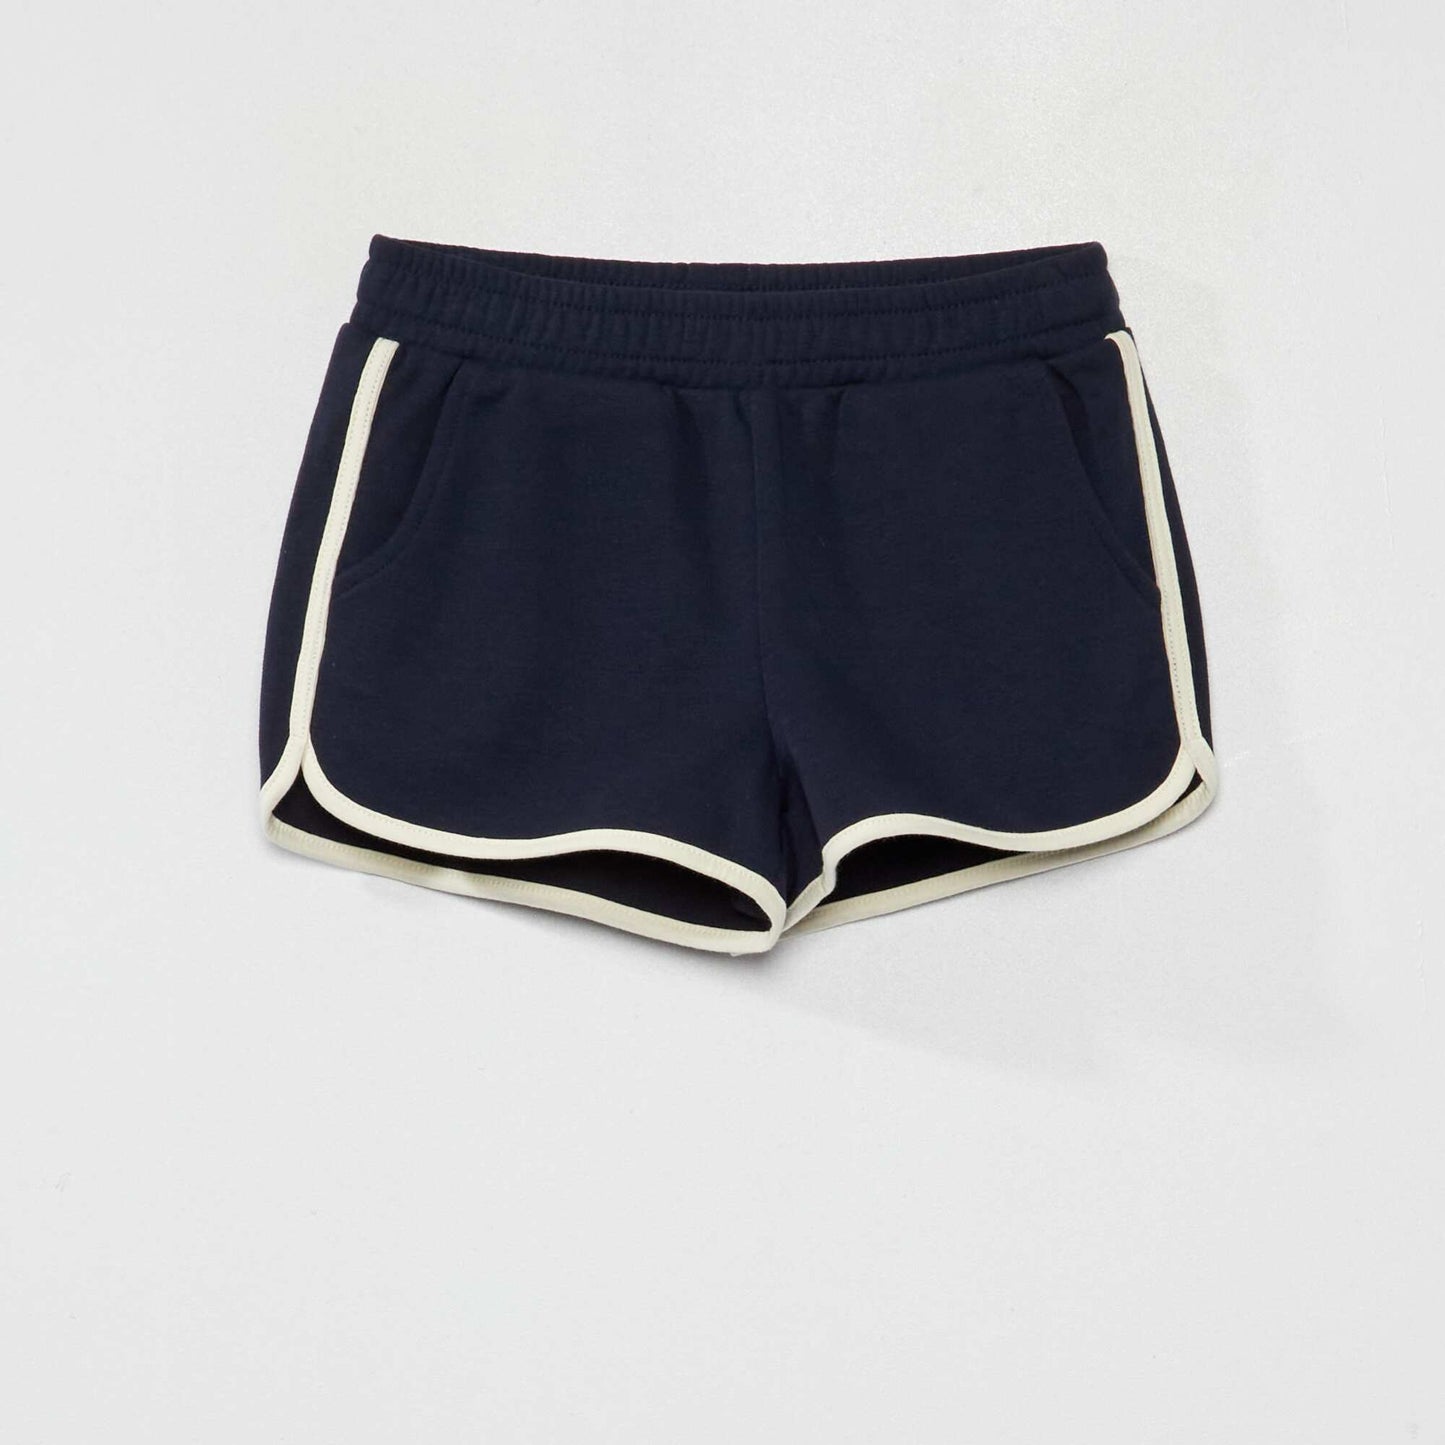 Sweatshirt fabric shorts with contrasting trims blue